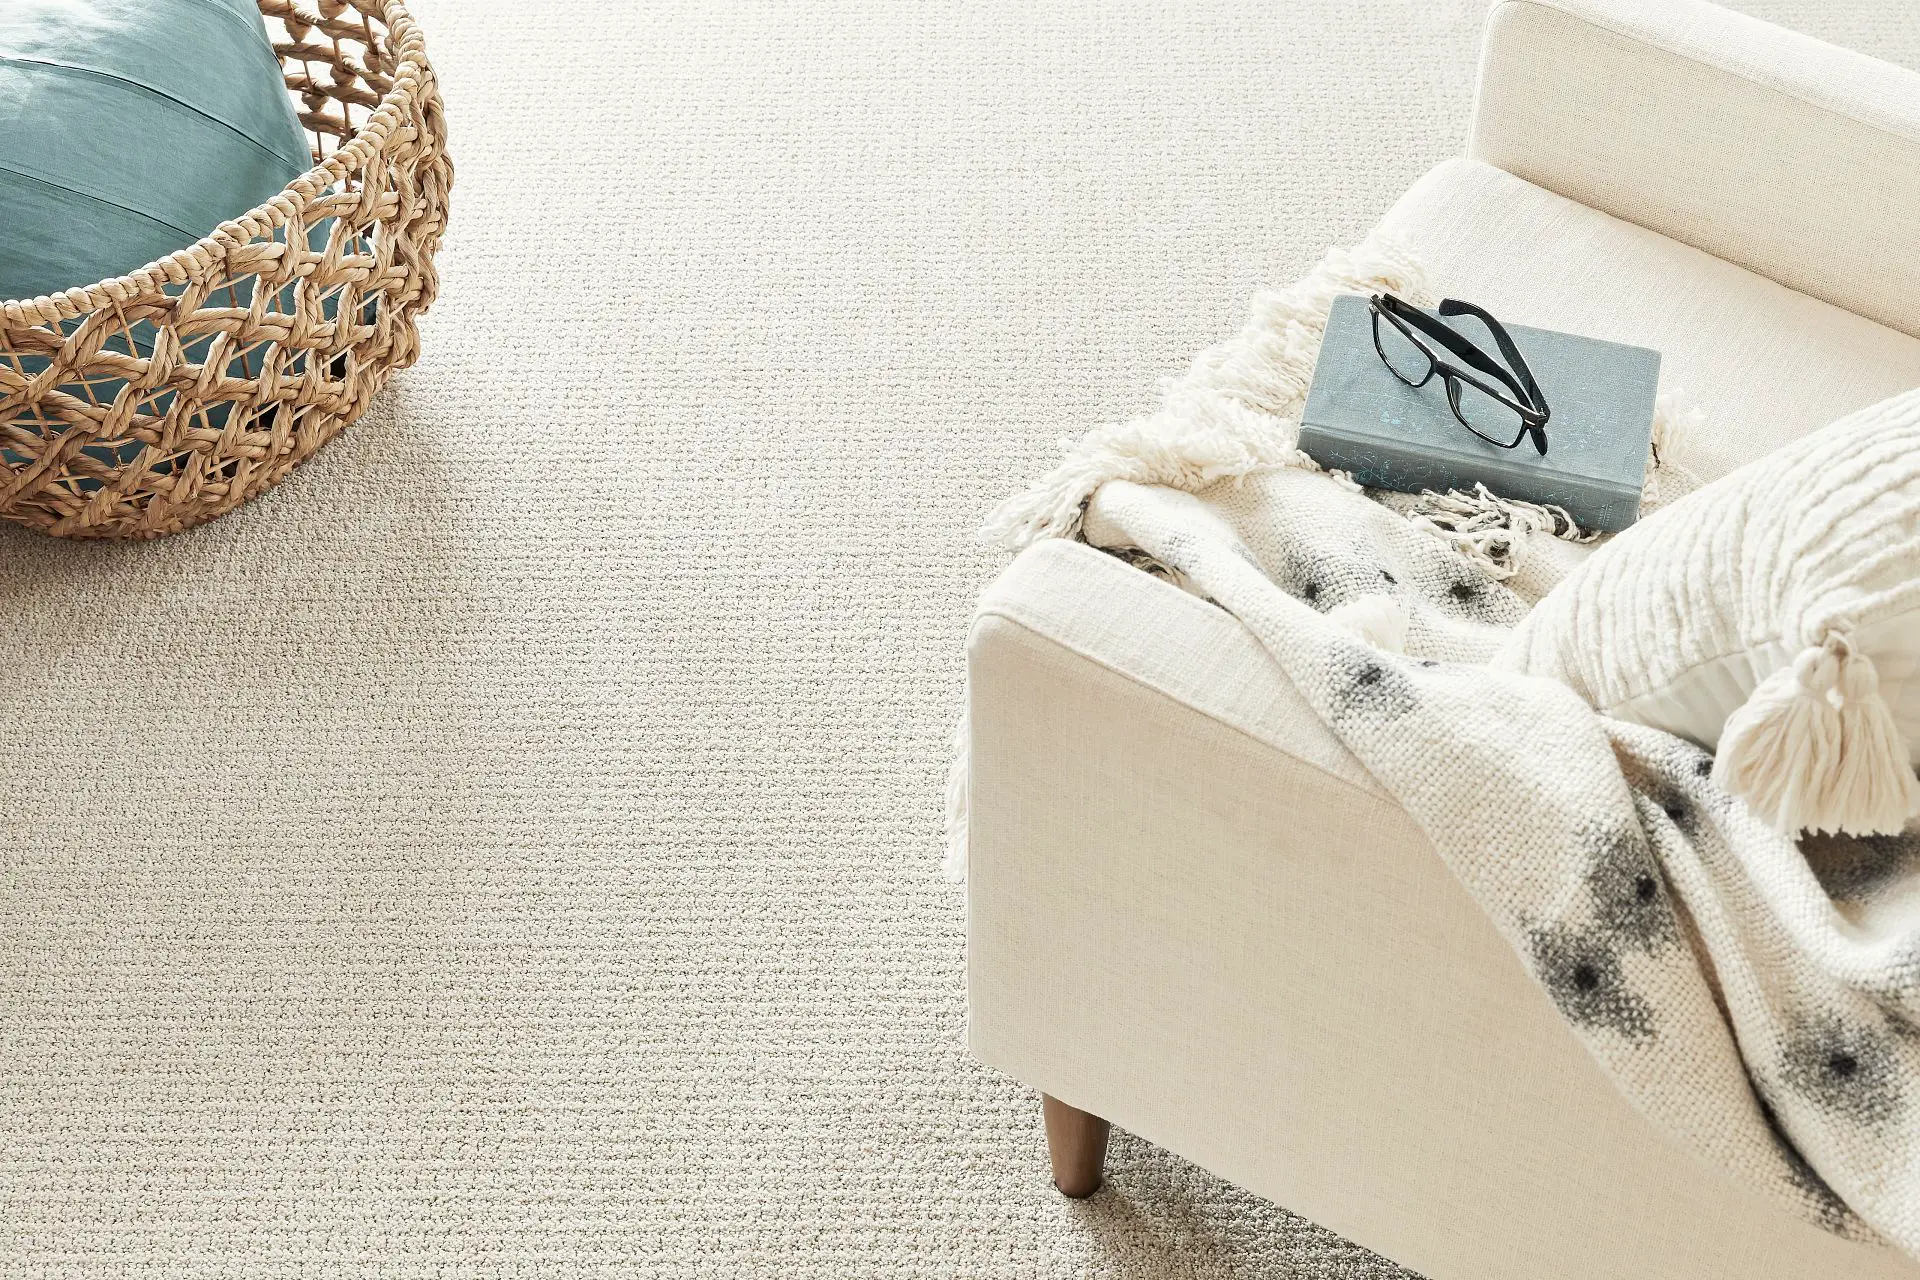 Benefits of Having Carpeting in Your Home